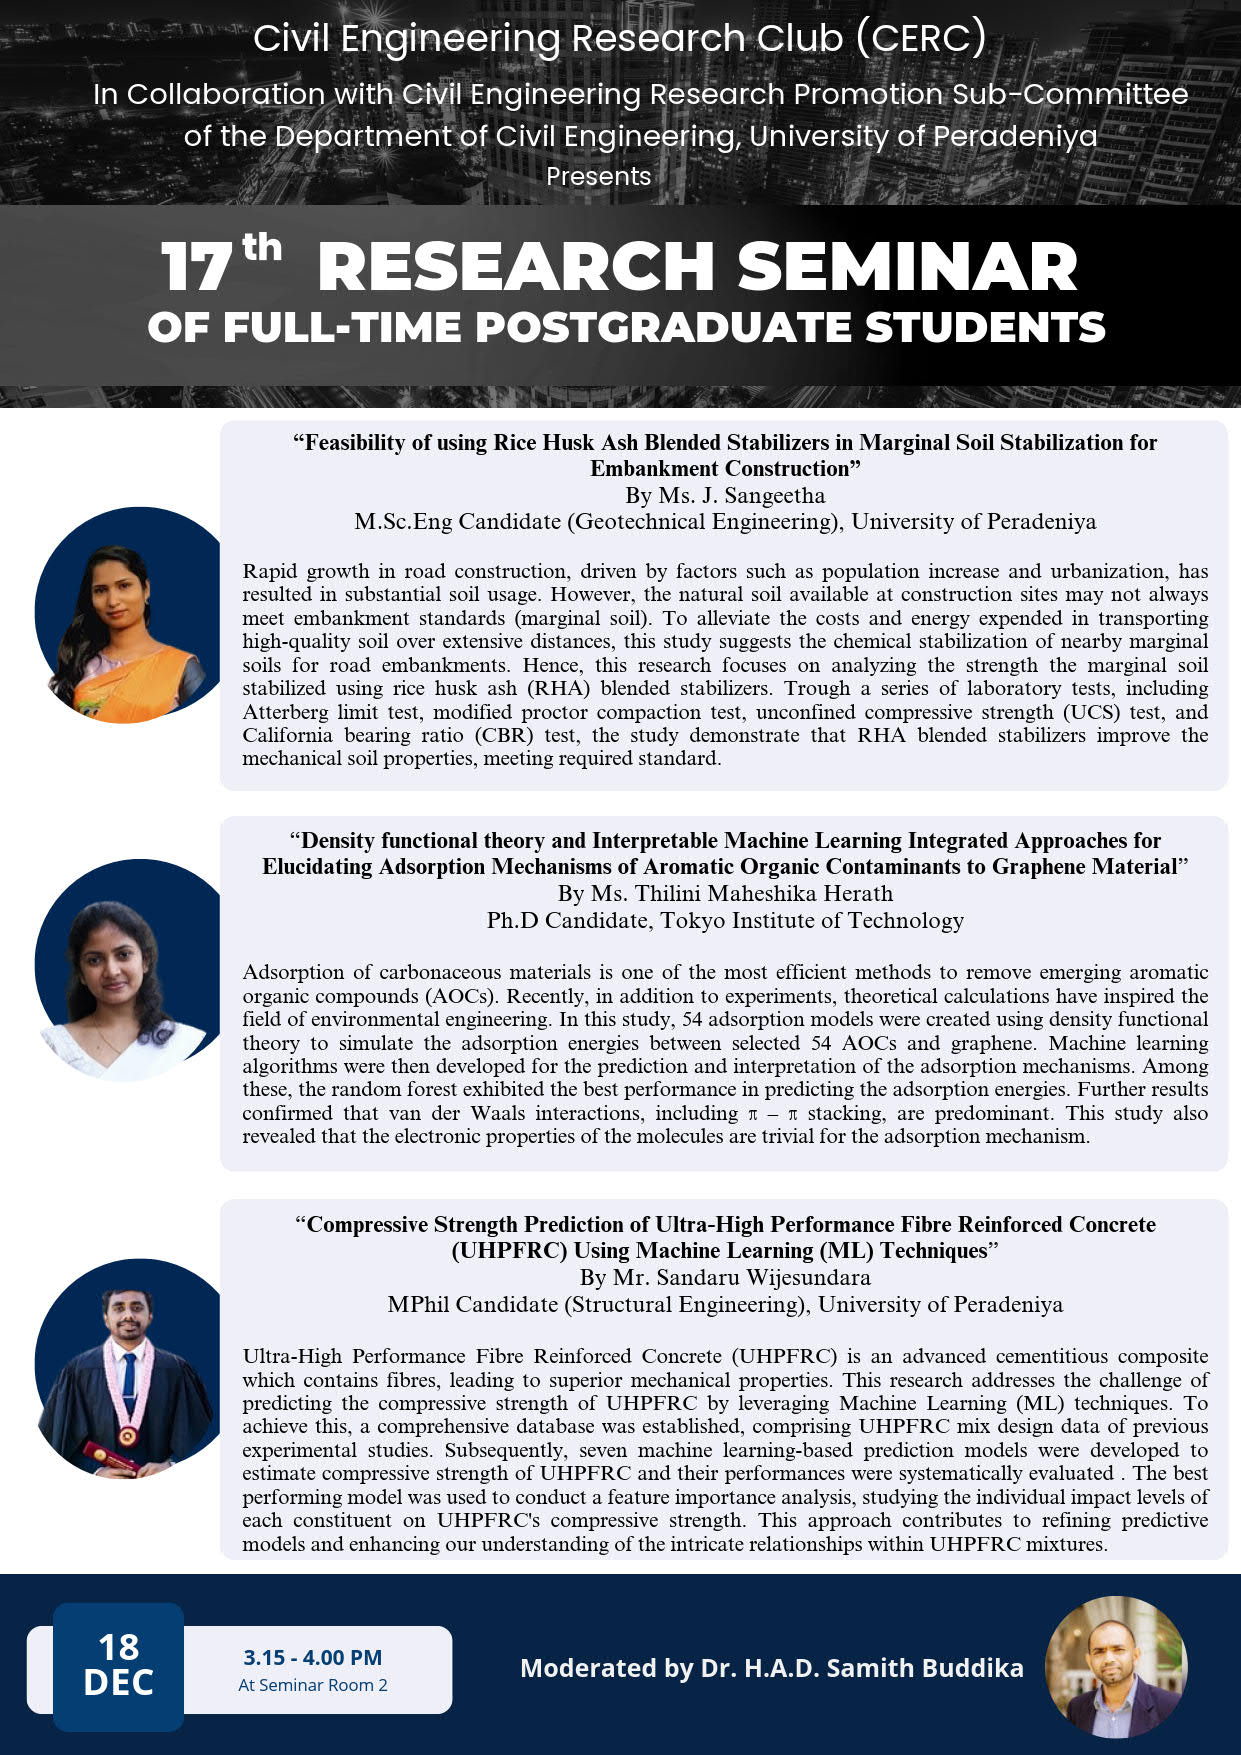 Civil Engineering 
            Research Club (CERC) 17th Research Seminar of Full-Time Postgraduate Students 